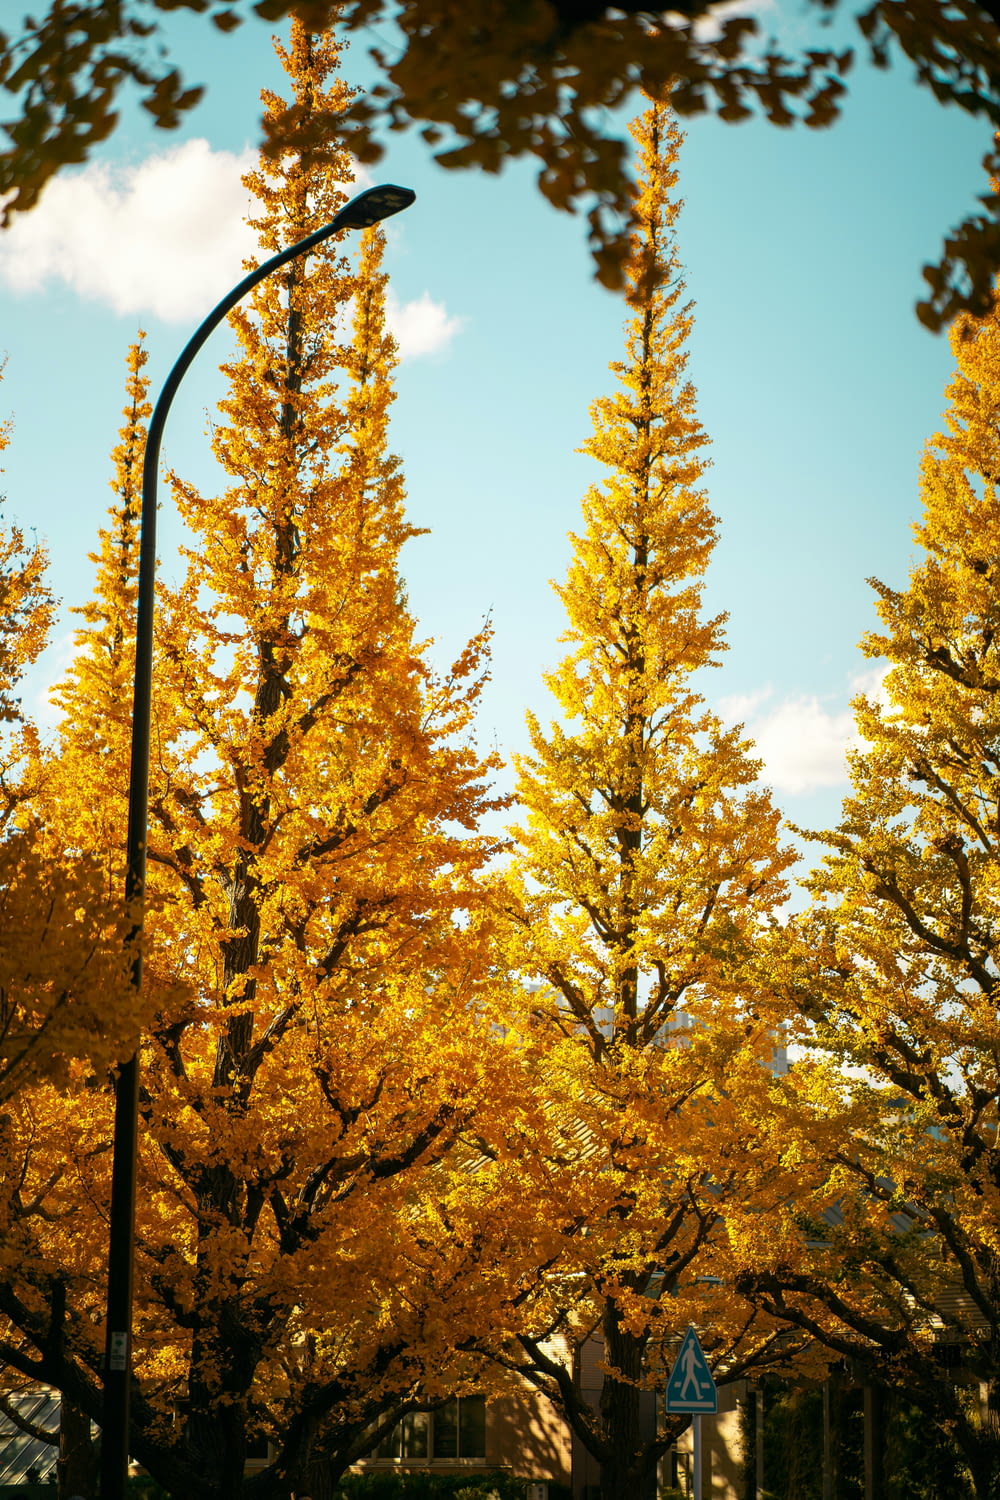 a street light in front of a row of yellow trees